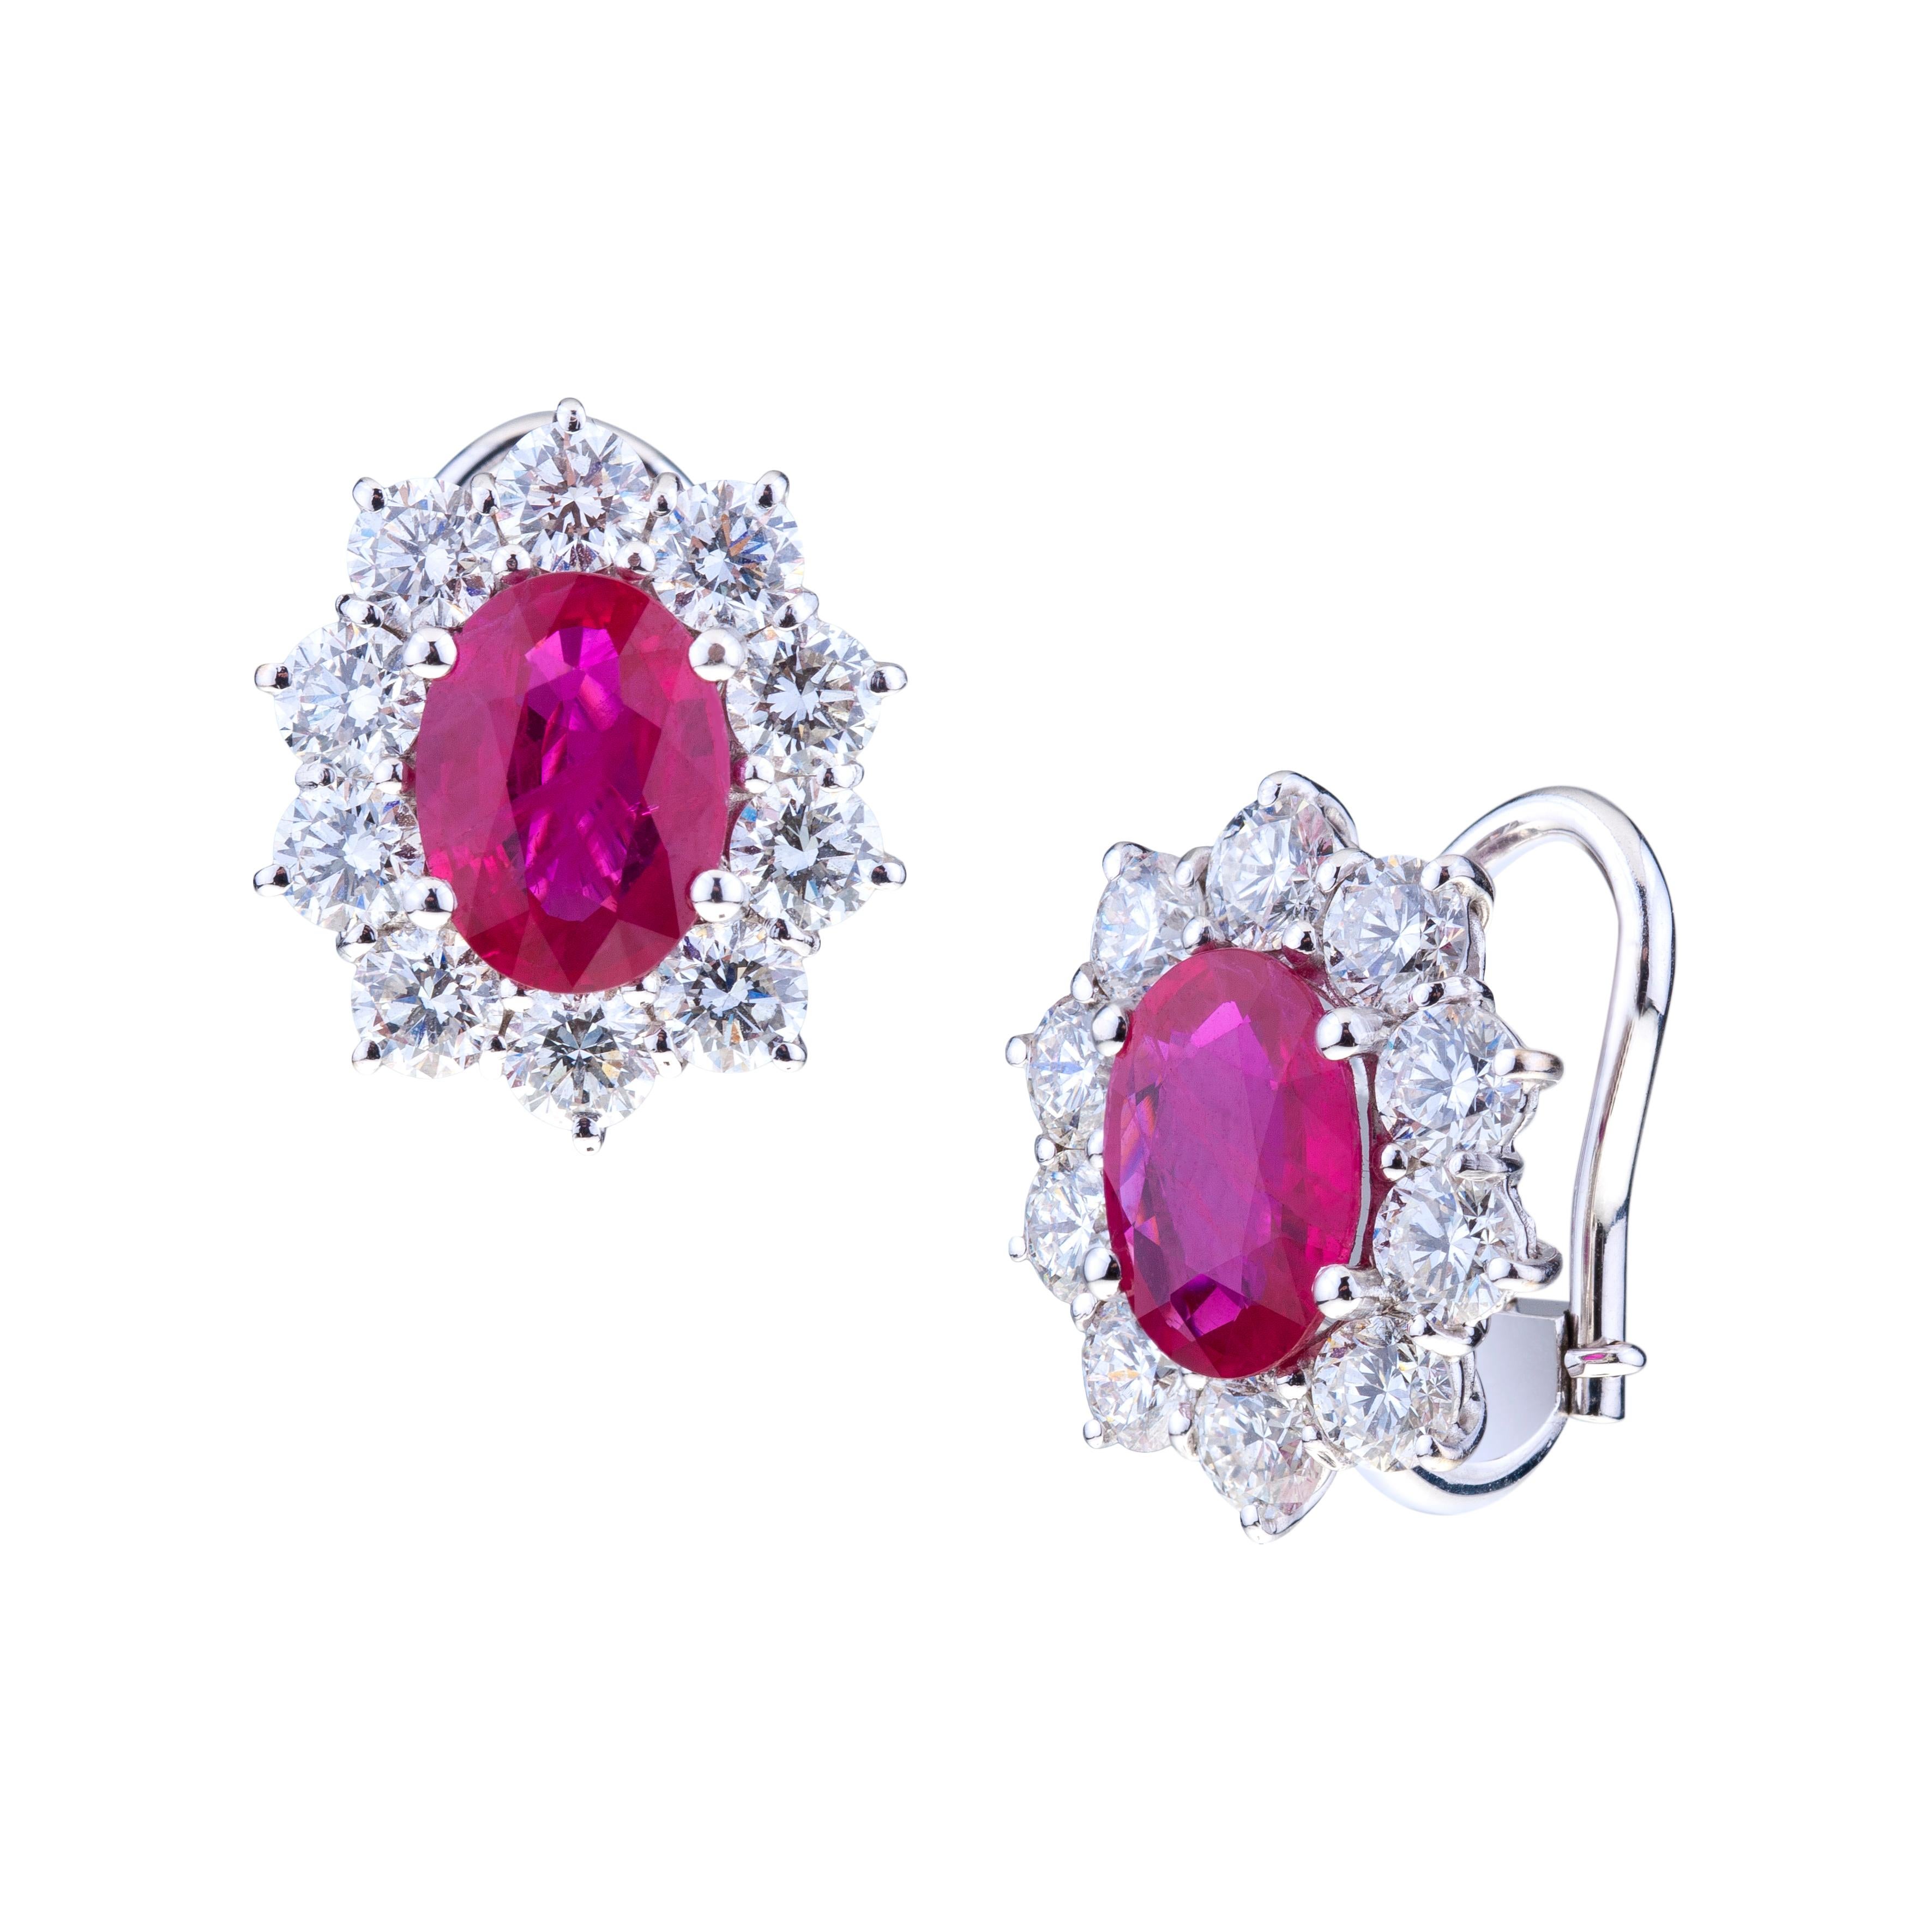 Oval Burma Red Ruby with Round Diamonds White Gold Earrings.
Classic Design for this Earrings with a pair of Stunning Oval Red Ruby Faceted ct. 3.94  with Round  Diamonds ct. 2.94 for this Unique Piece.
Designed in Italy.
Angeletti Boasts an